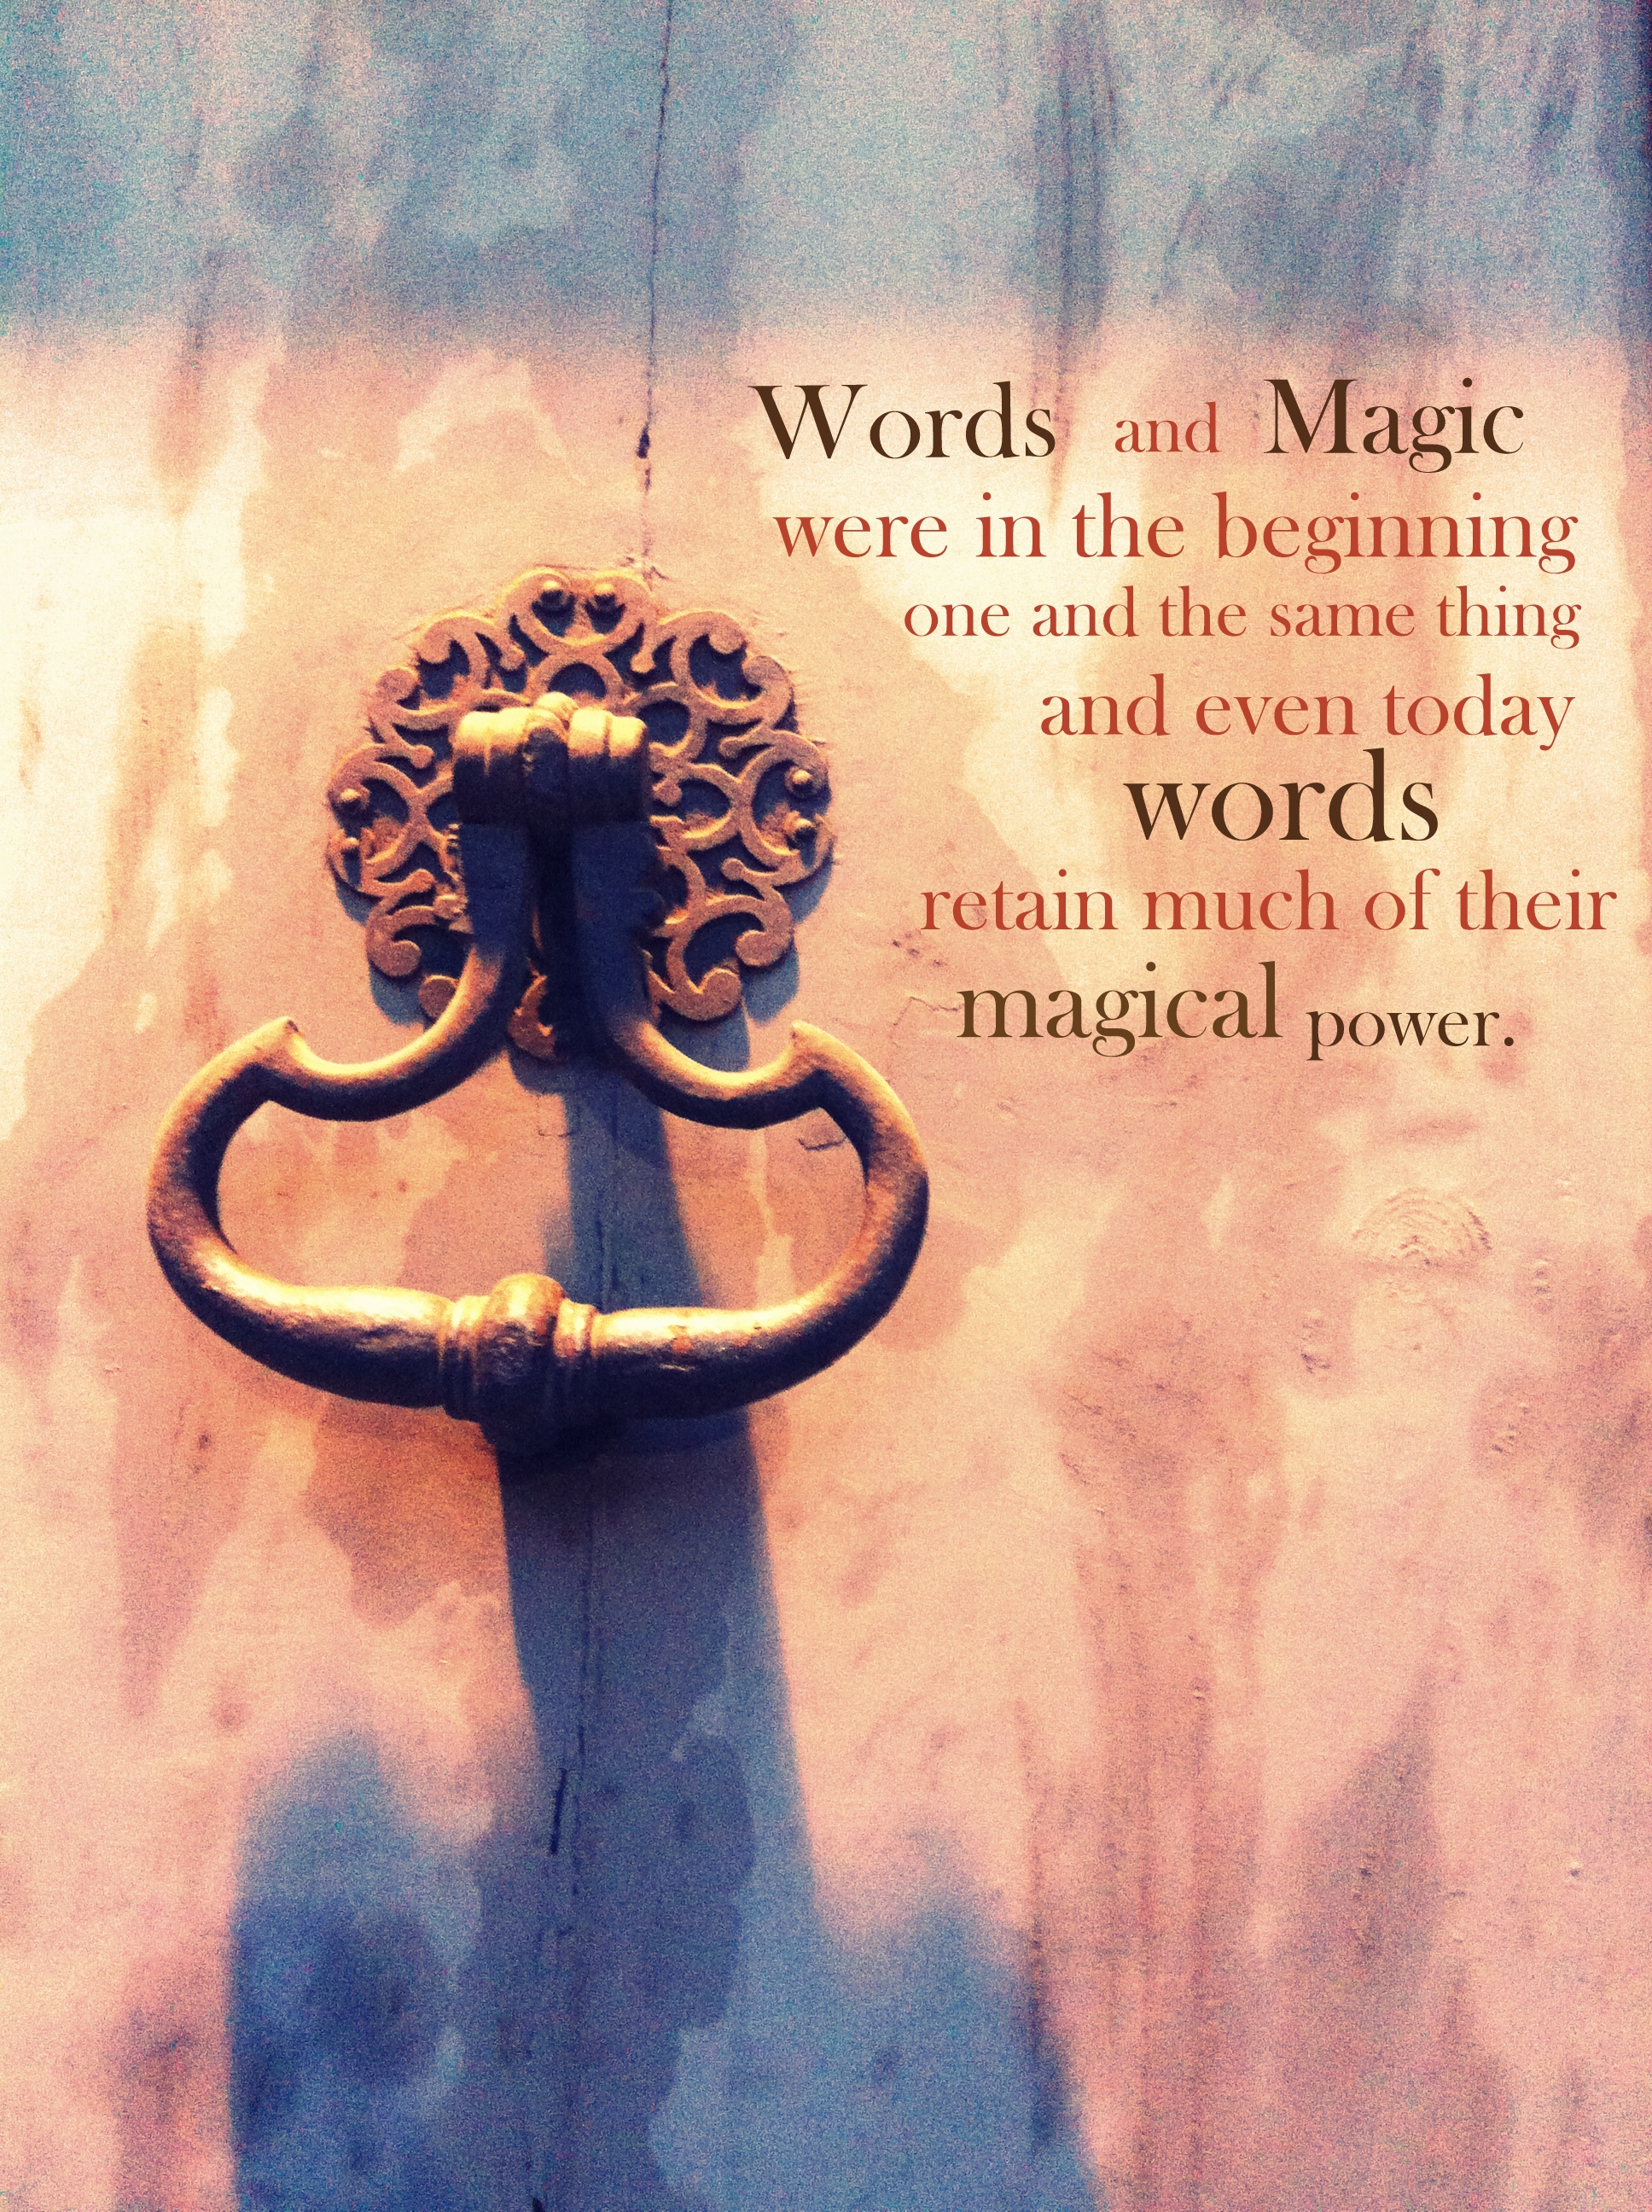 Words and magic were in the beginning one and the same thing, and even today words retain much of their magical power